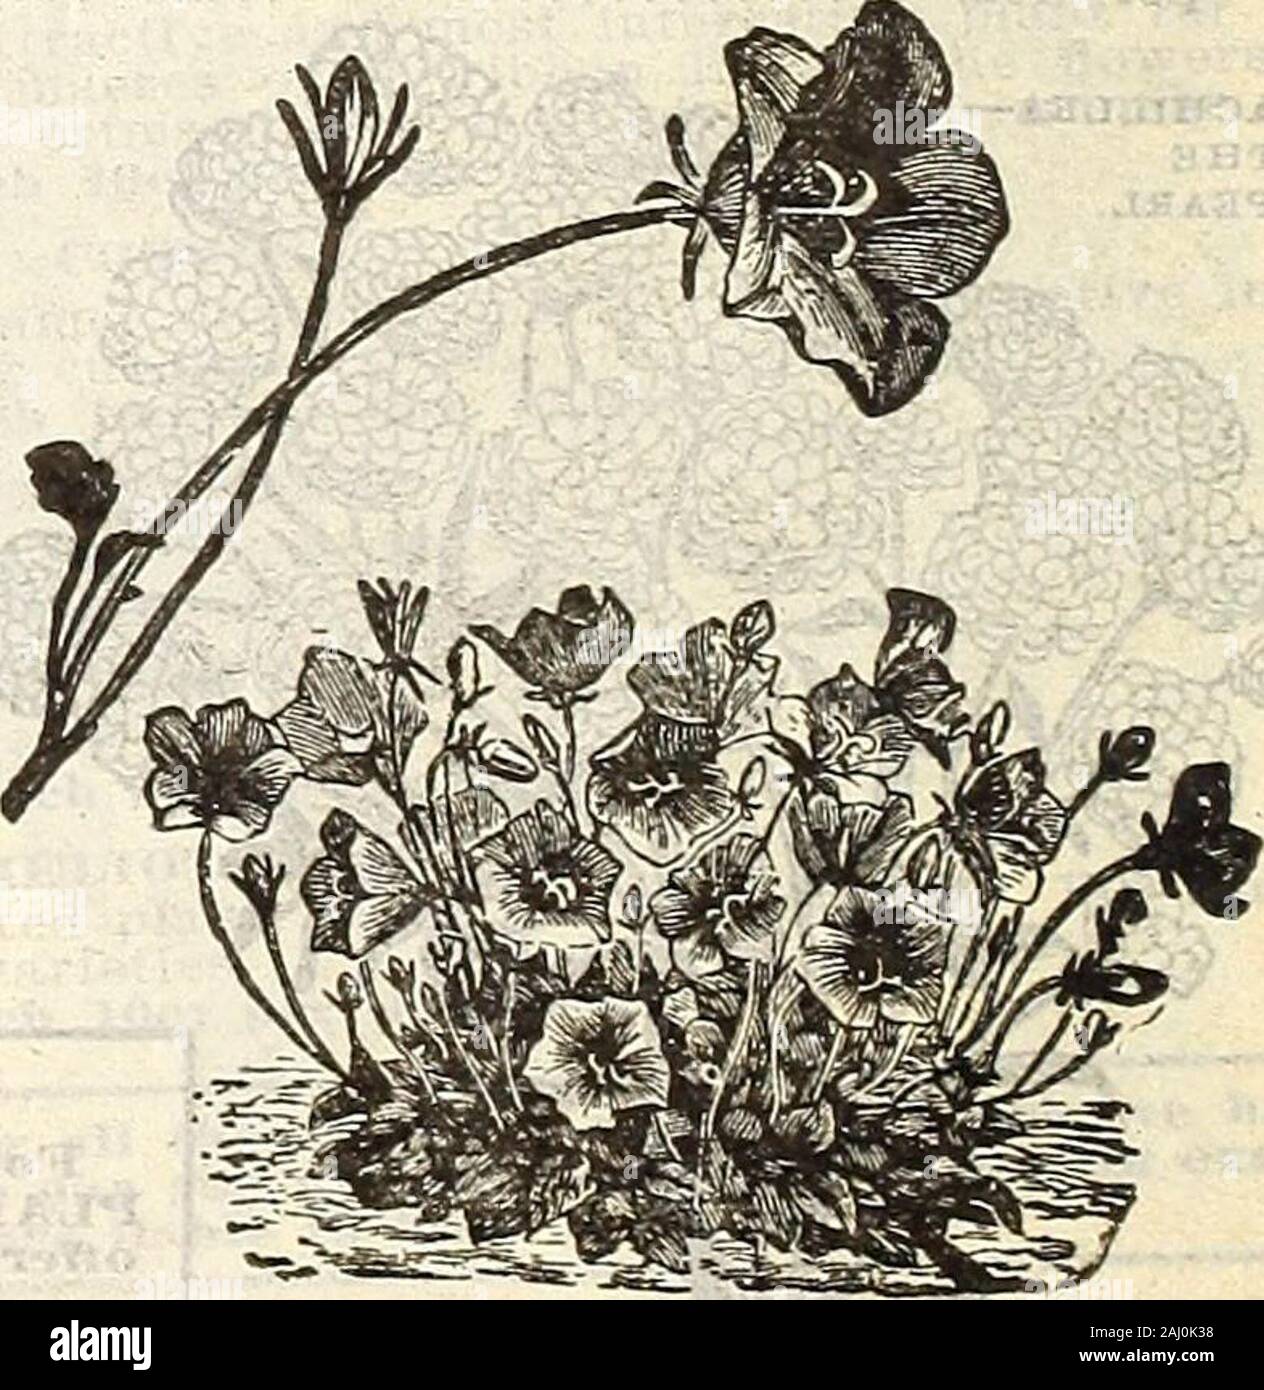 Farm and garden annual : spring 1907 . of all borderplants. They are certainly very attrac-tive and interesting.C. Carpatica—1 foot, June. Blue. Each 15c; per doz $1.50 C. Grandiflora—2 feet, July. Flow-ers a rich blue; a superb variety. Each 20c; per doz $2.00 C. Van Houttei—2 feet. June. Blue.Each 20c; per doz $2.00 CENTRANTHUS—^Valerian. Showy plants which should And a place in every garden.They succeed well in any good soil.C. Ruber (Jupiters Beard)—2 feet, June. Handsome spikes of crimson flowers. Each 15c; per doz $1.50 CHEIjONE—Tortoise or Shell Flovrer. Very handsome border plants, rob Stock Photo